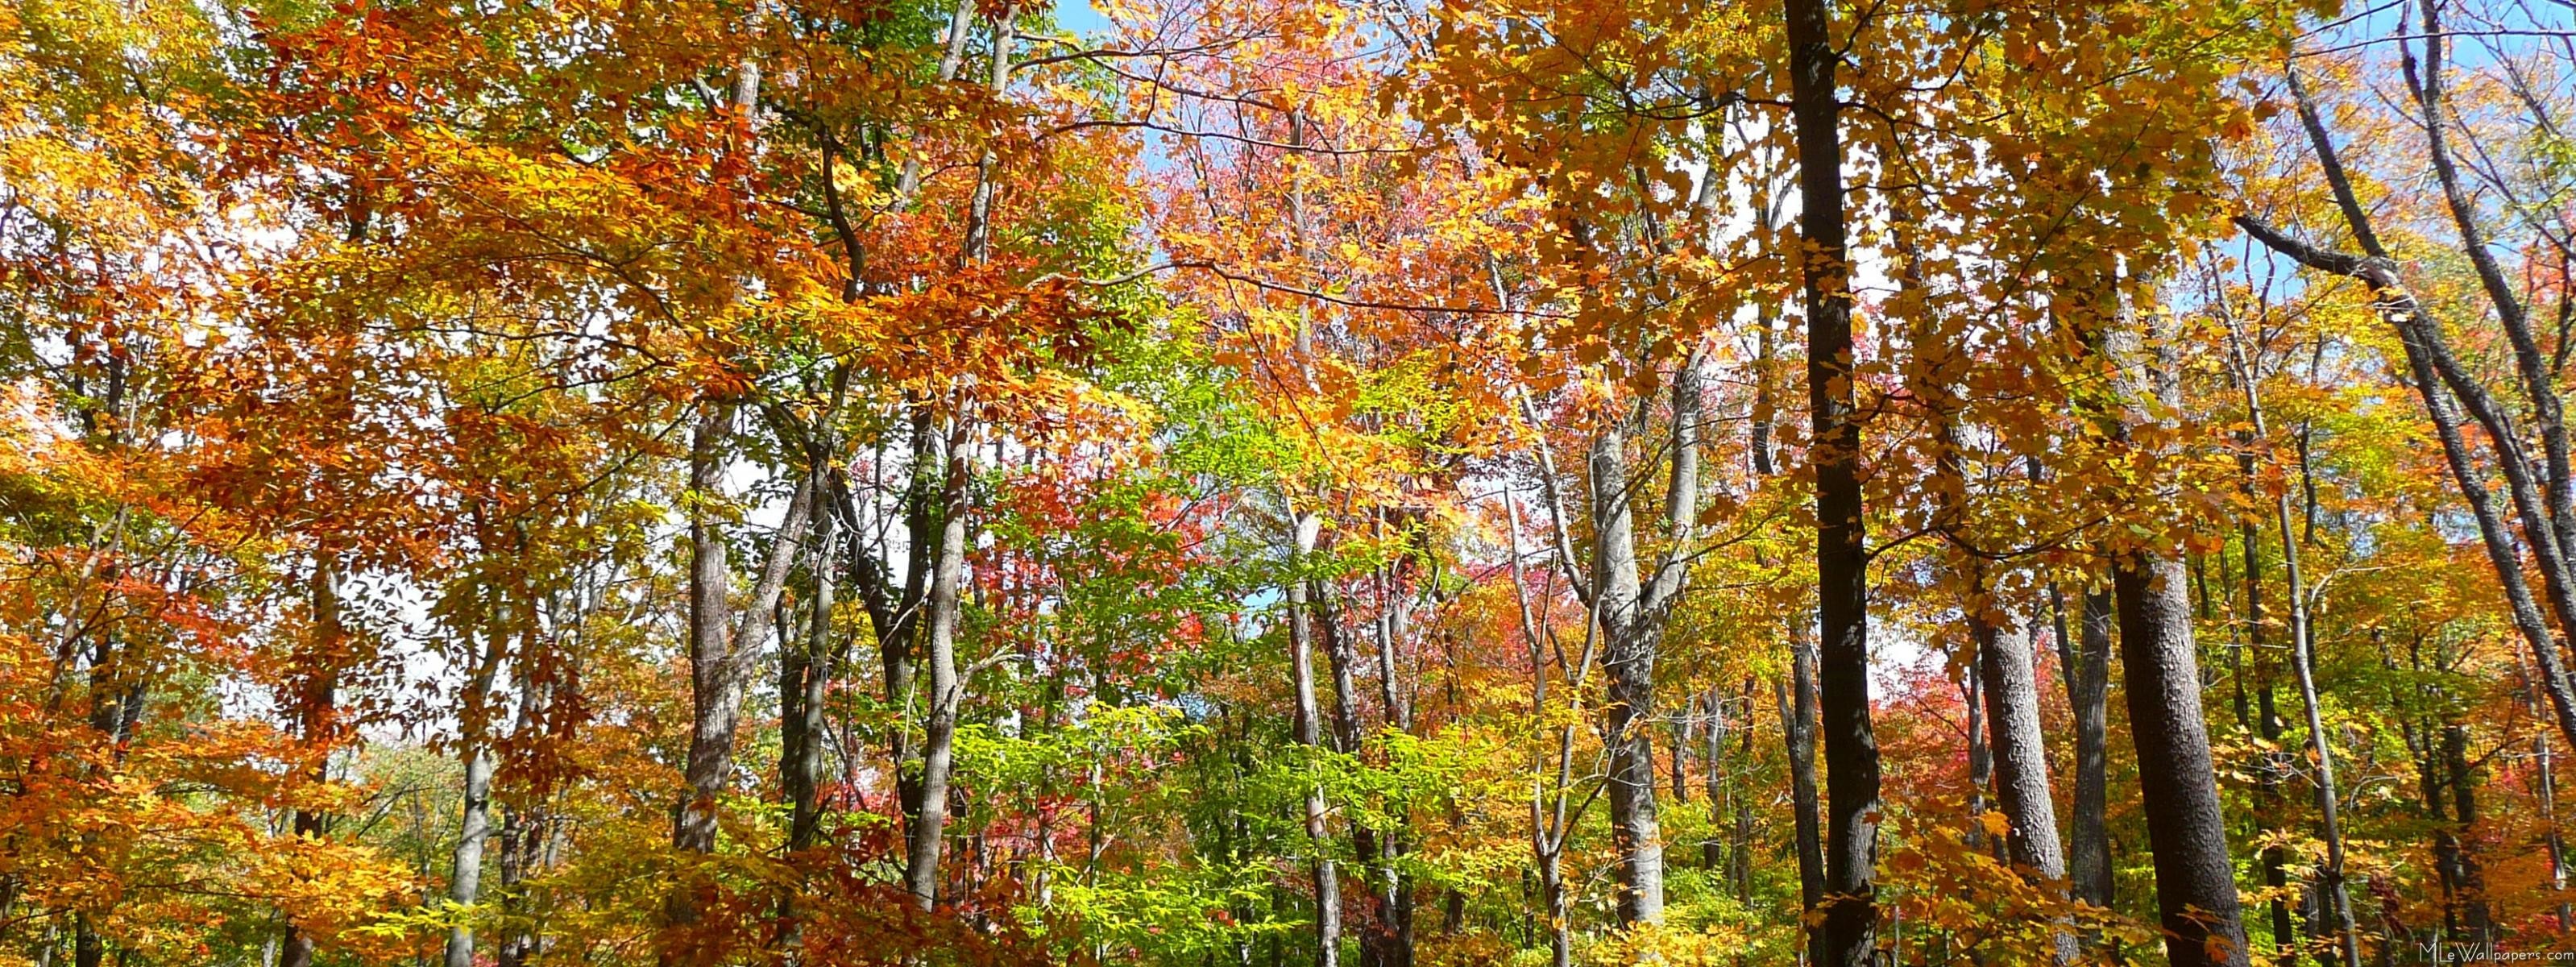 3197x1200 Fall Forest II